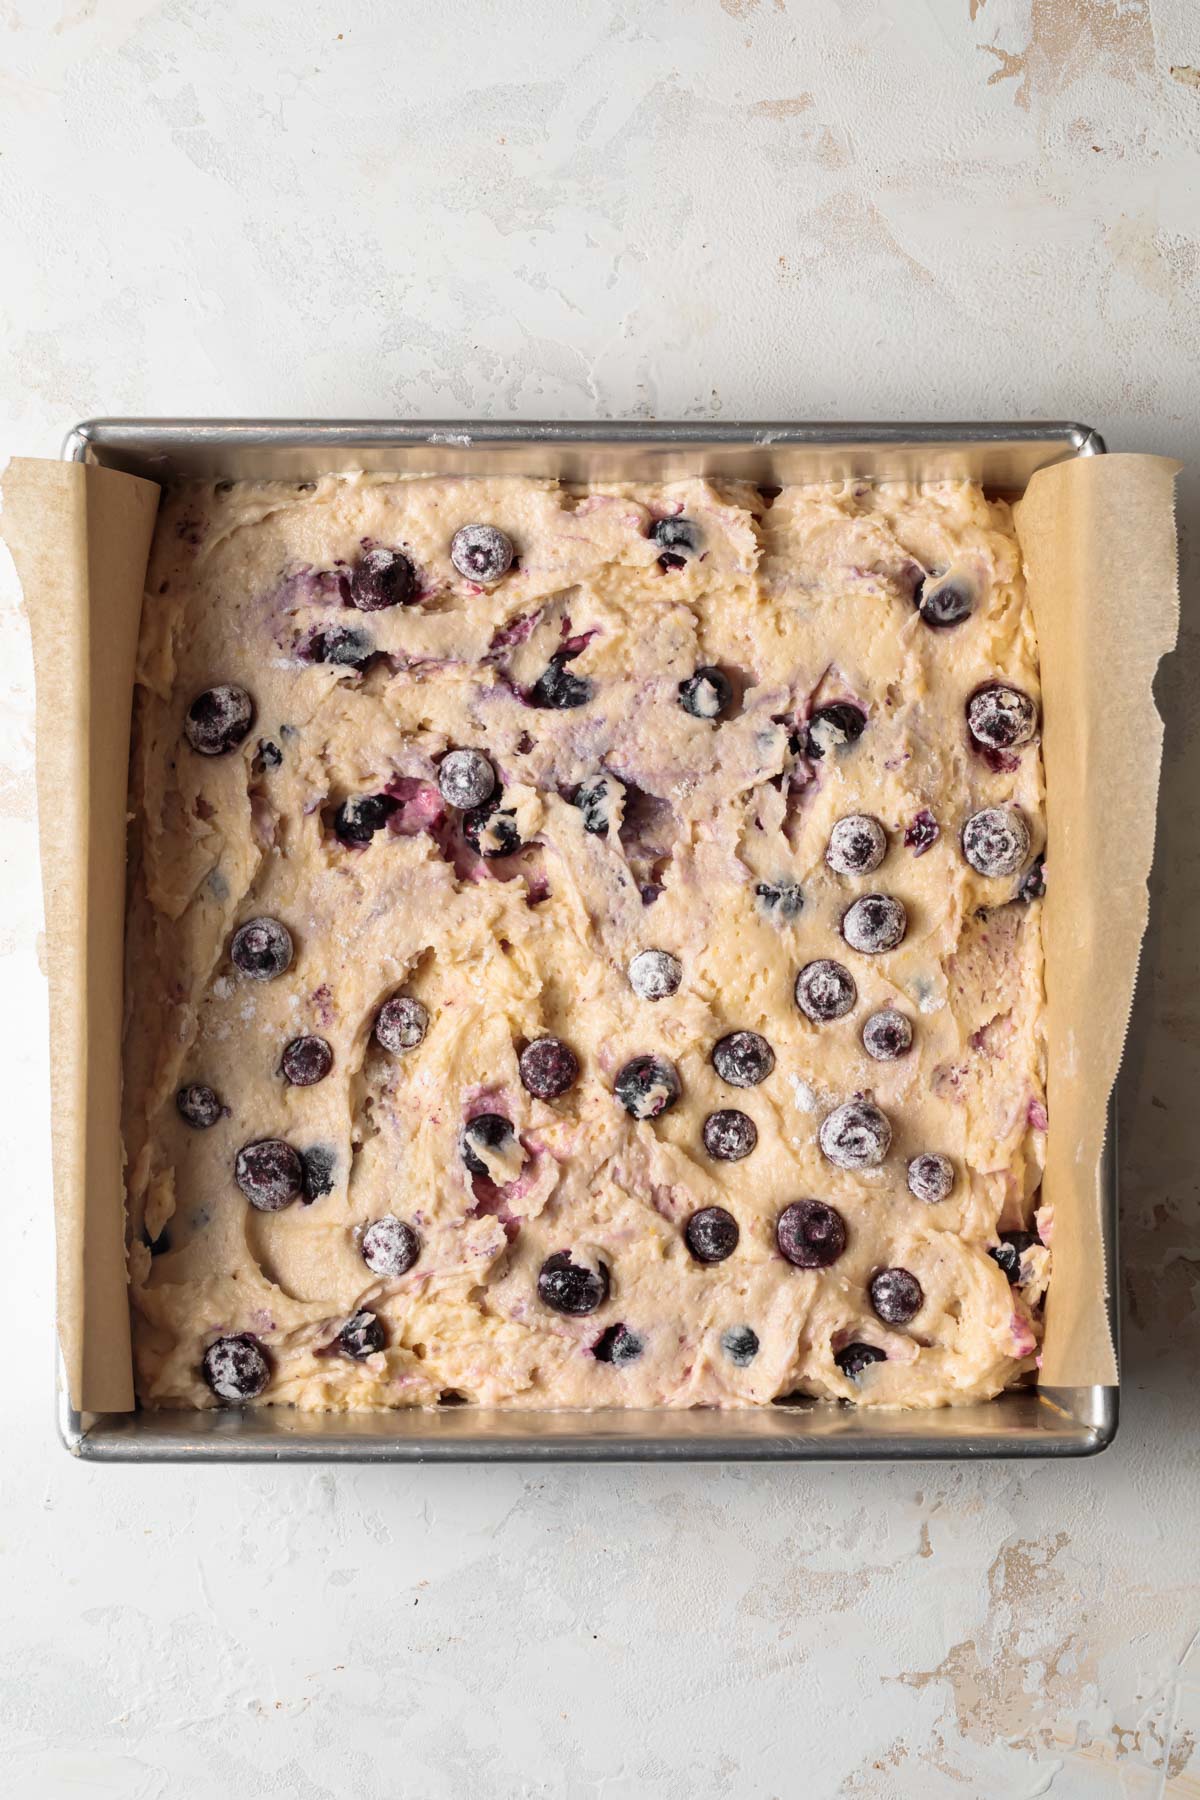 Blueberry coffee cake batter in a baking pan